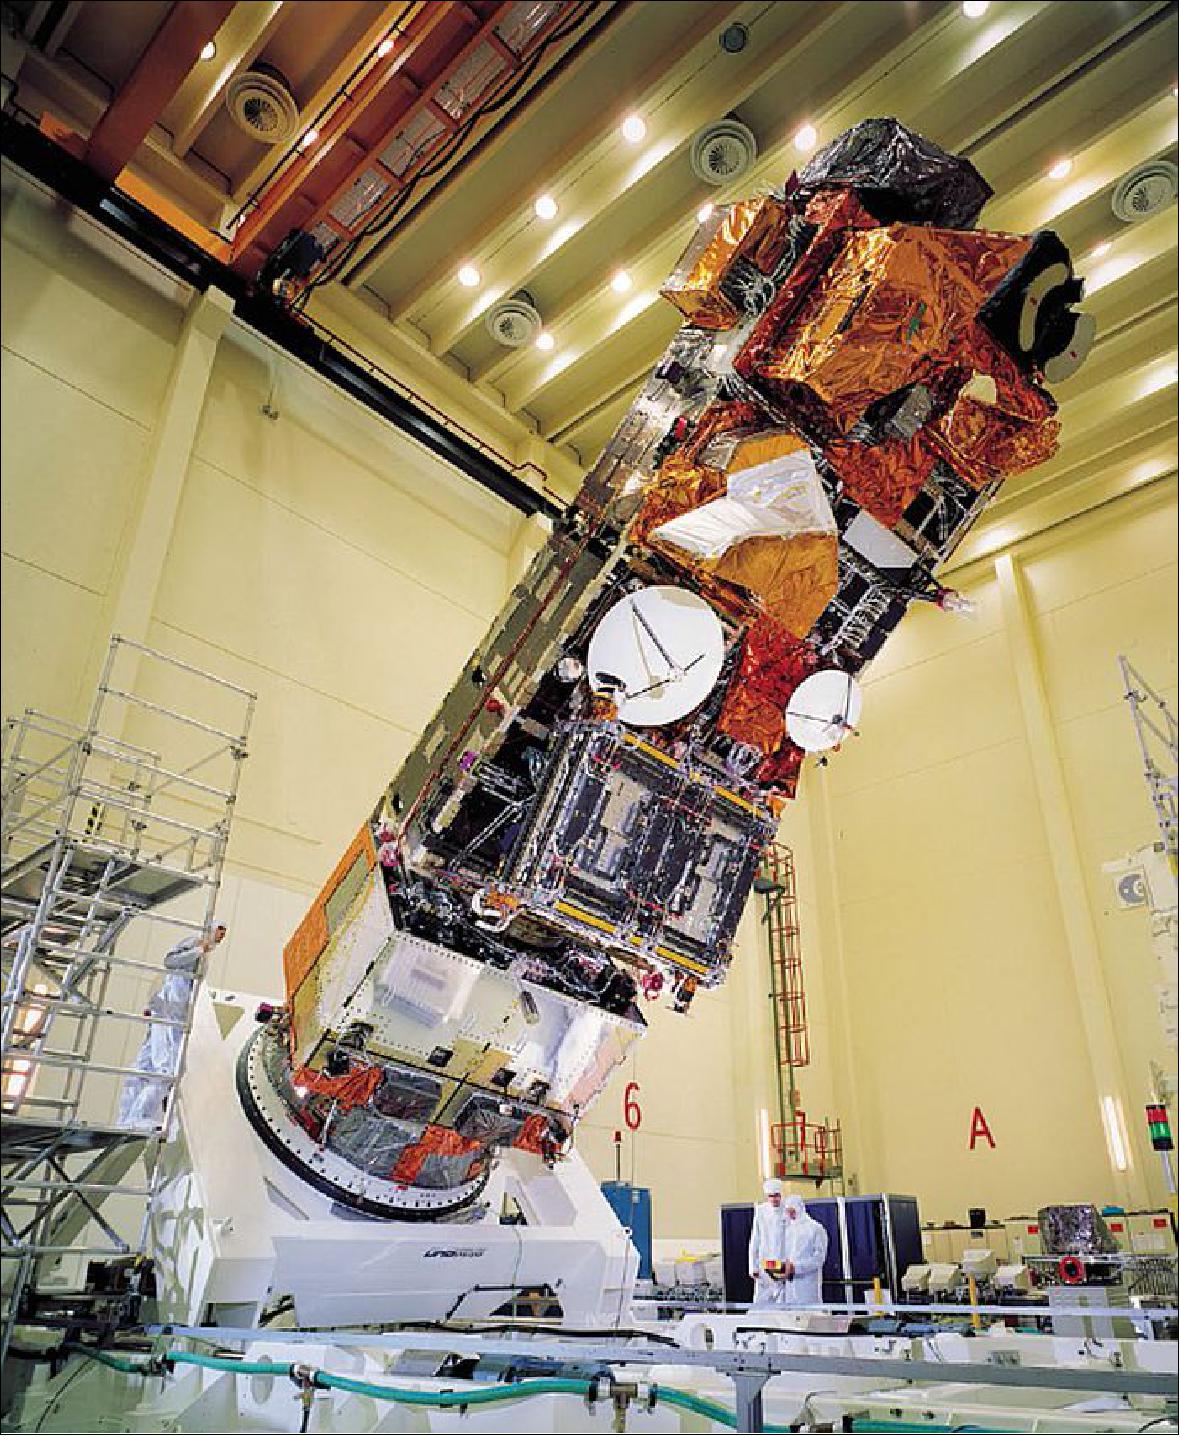 Figure 3: Photo of Envisat, the largest Earth Observation satellite to date, during integration at ESTEC in 2000 (image credit: ESA)